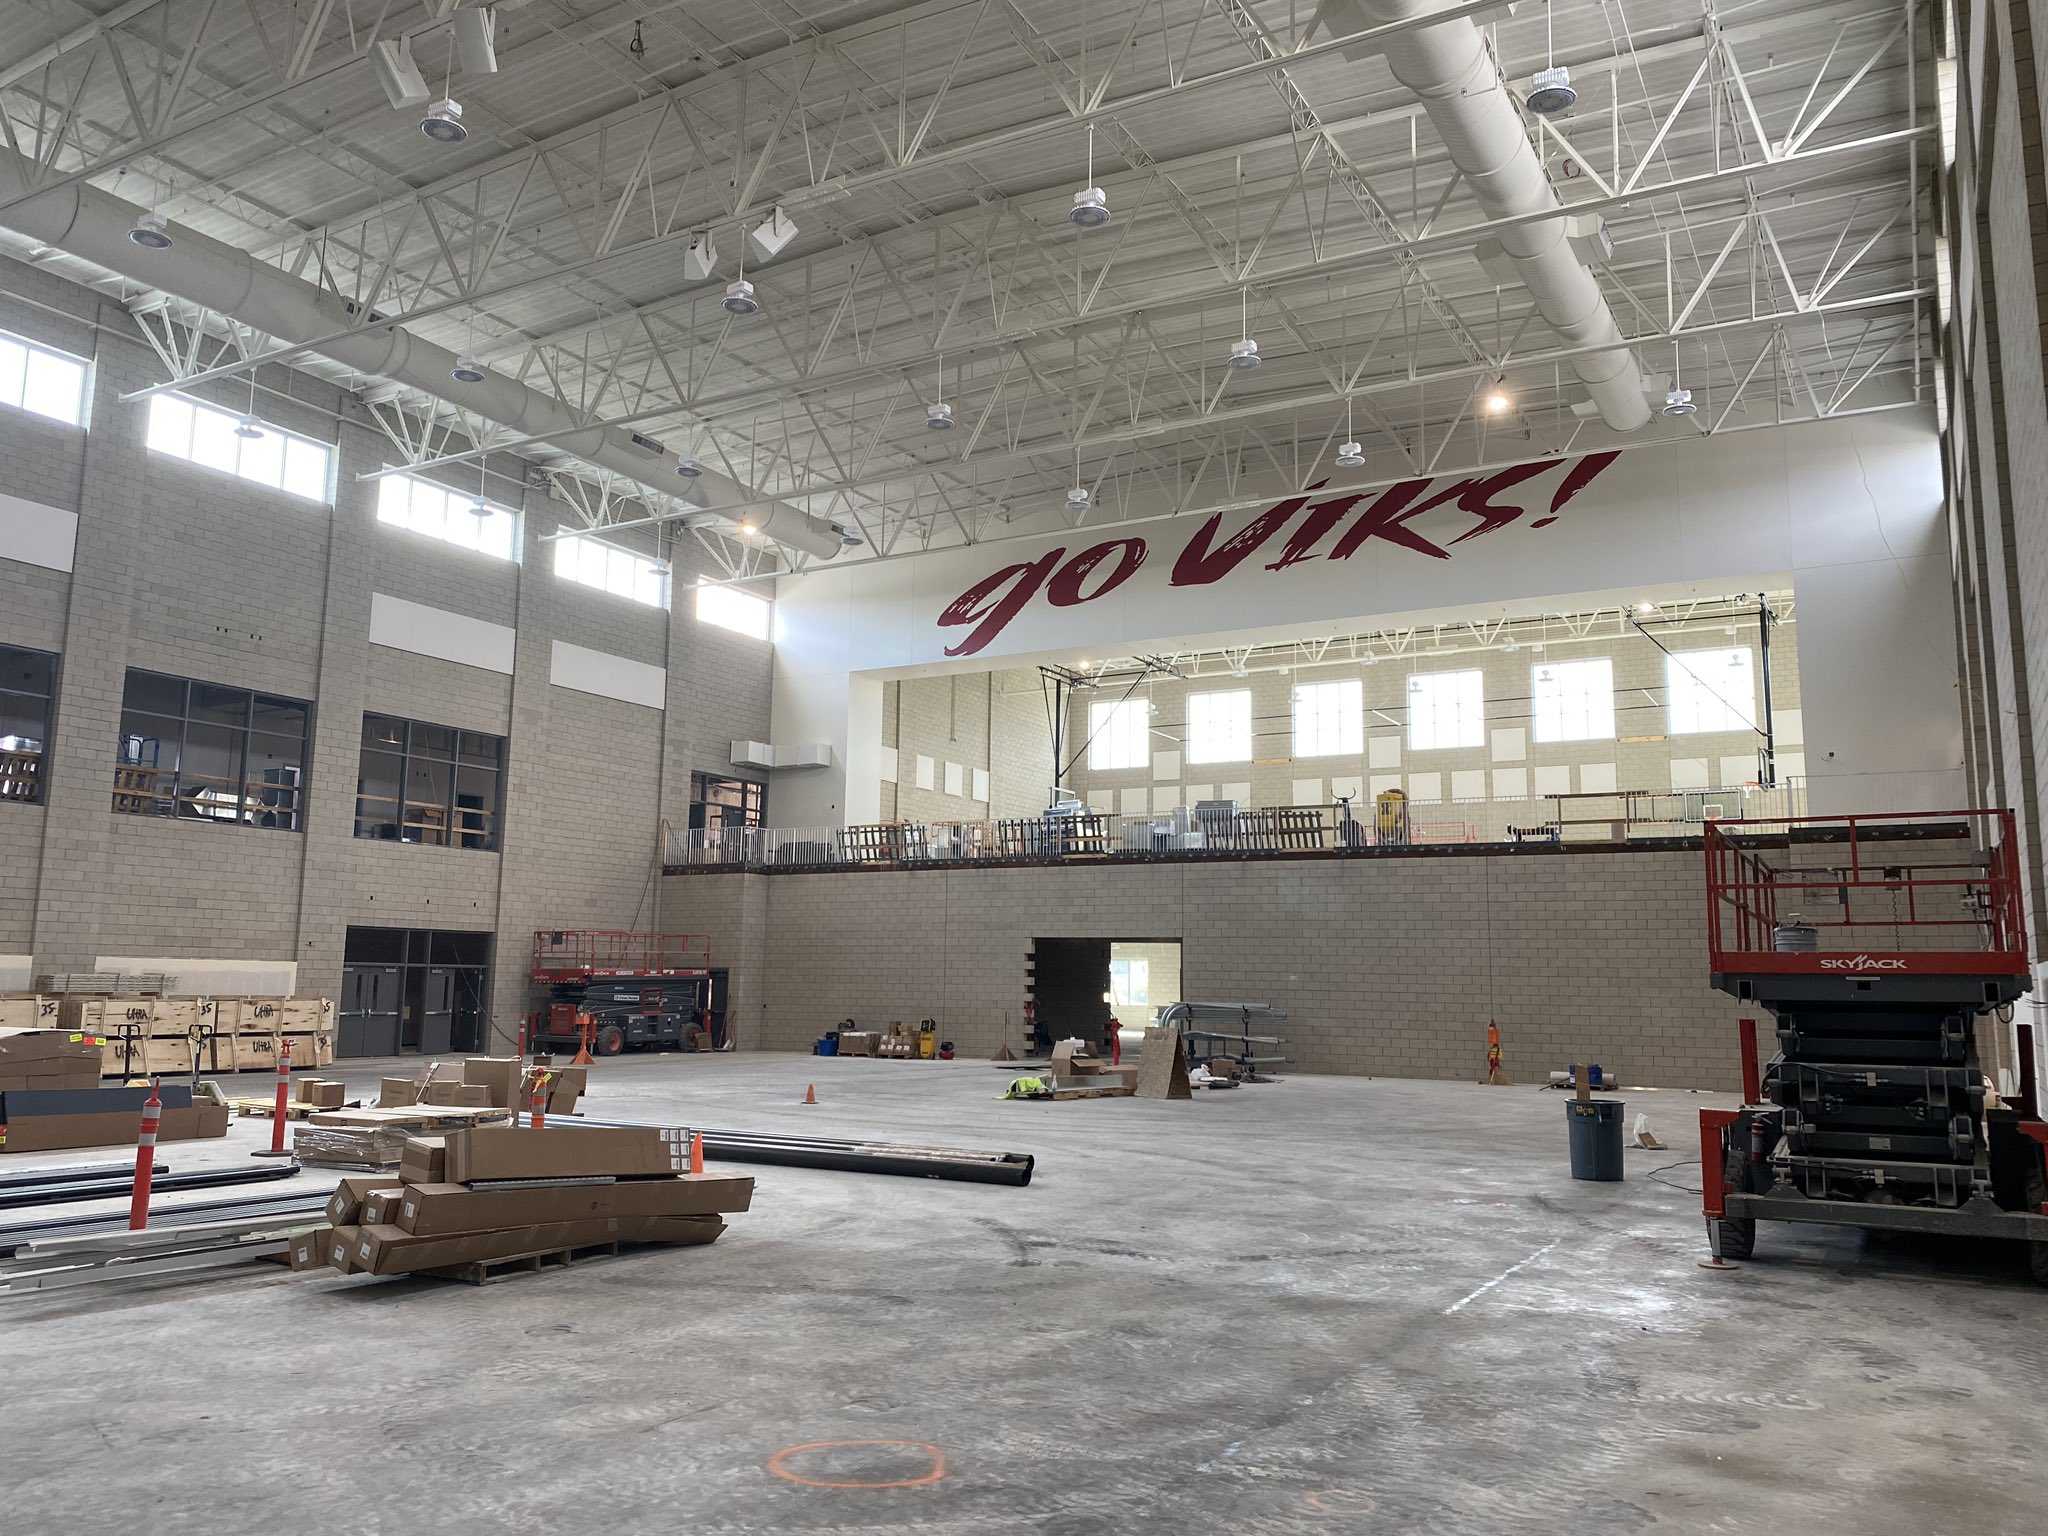 Construction on the North Salem gym is scheduled to be completed in August. (Photo courtesy North Salem HS)